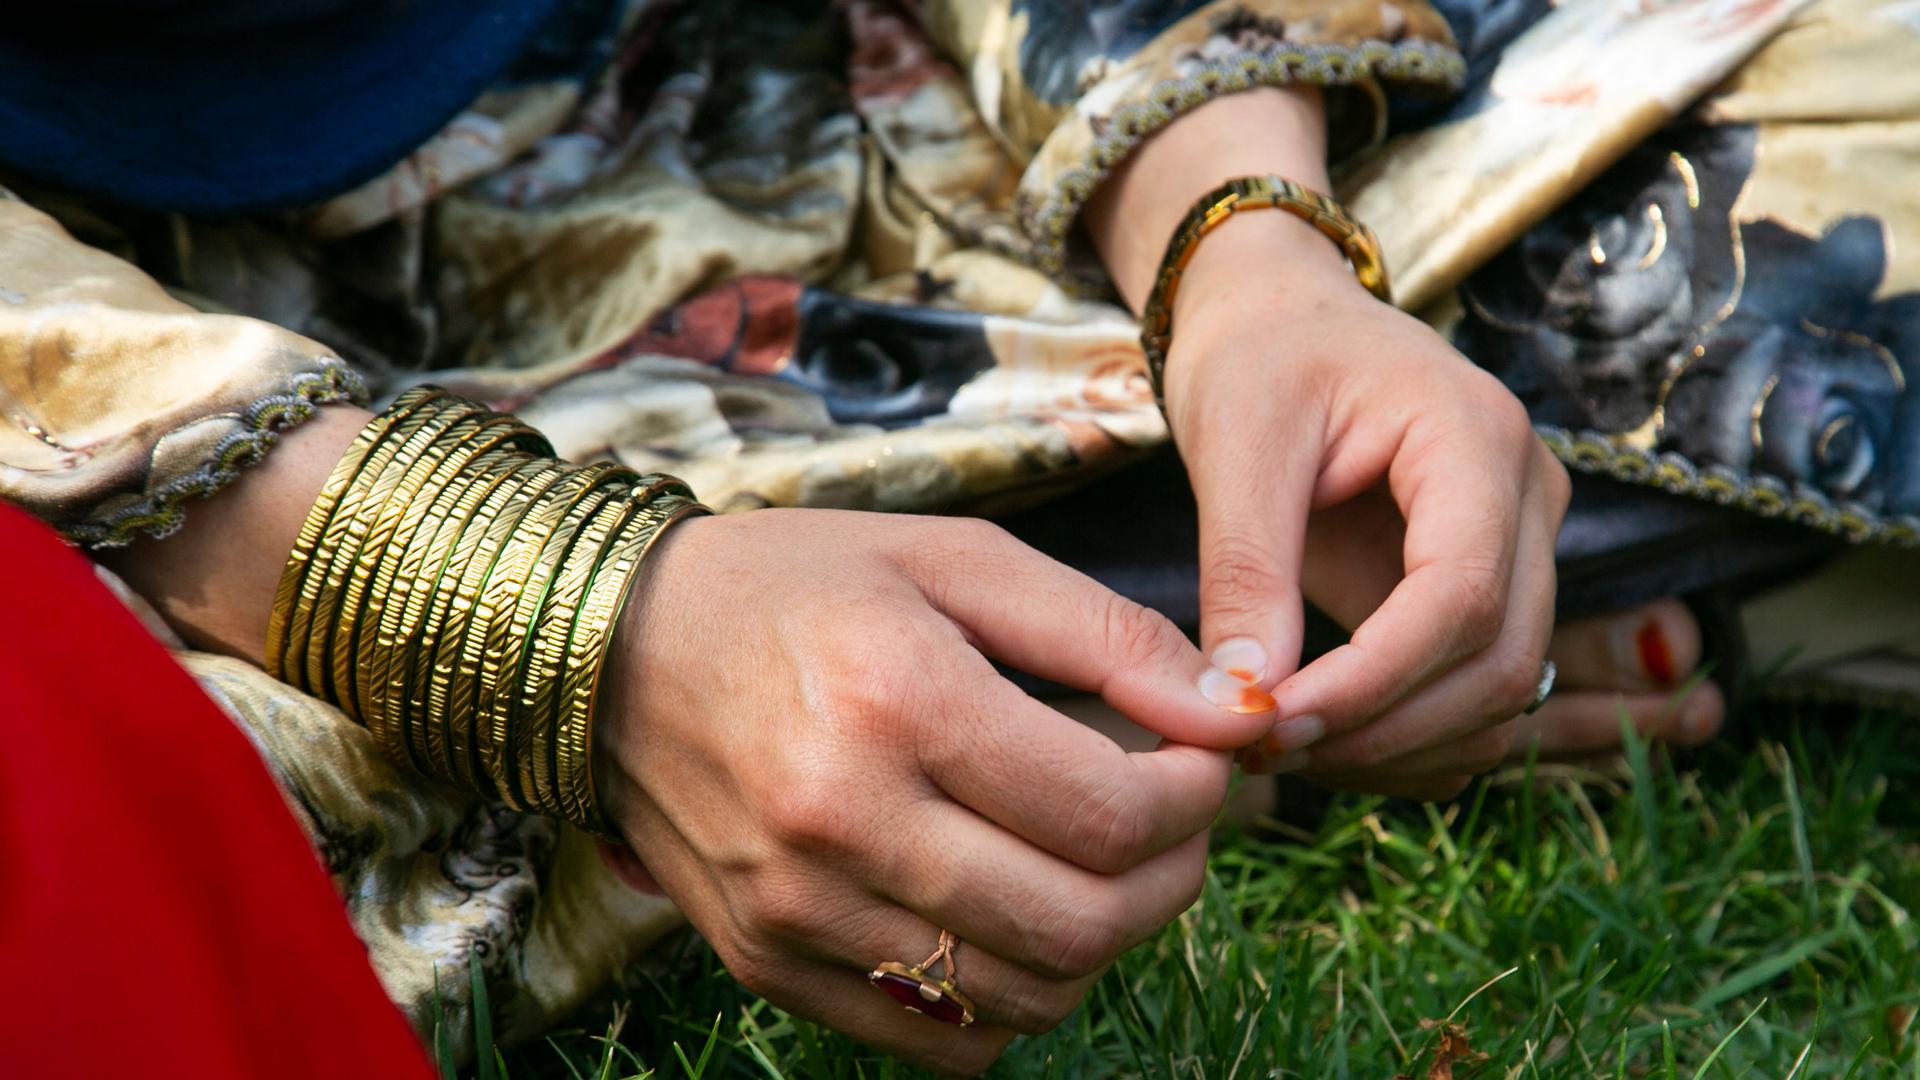 A close-up photograph shows a woman's hands with lots of golden-colored braclets on her right wrist and a watch on the left wrist.